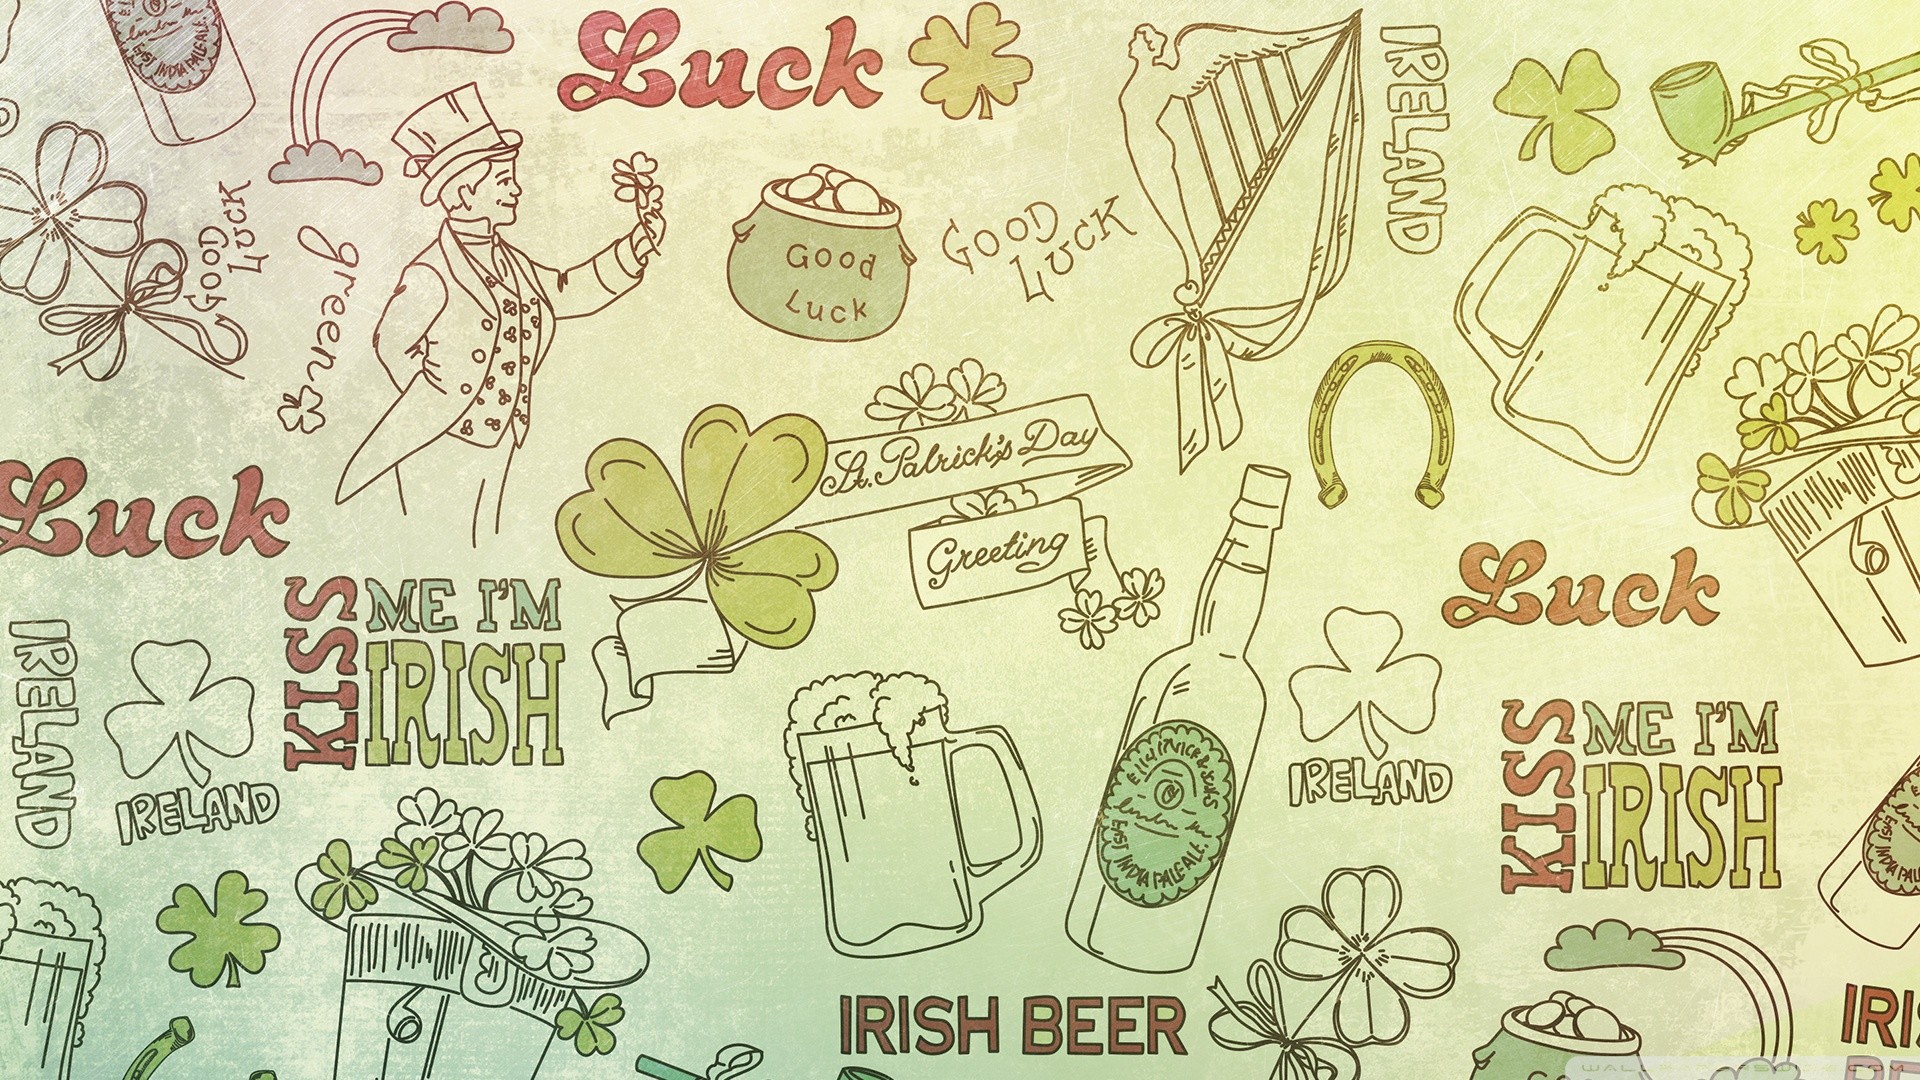 1920x1080 St. Patrick's Day Wallpaper for Computer | St Patricks Day 4 Wallpaper |  ::::ST. PATRICK'S DAY:::: | Pinterest | St pats